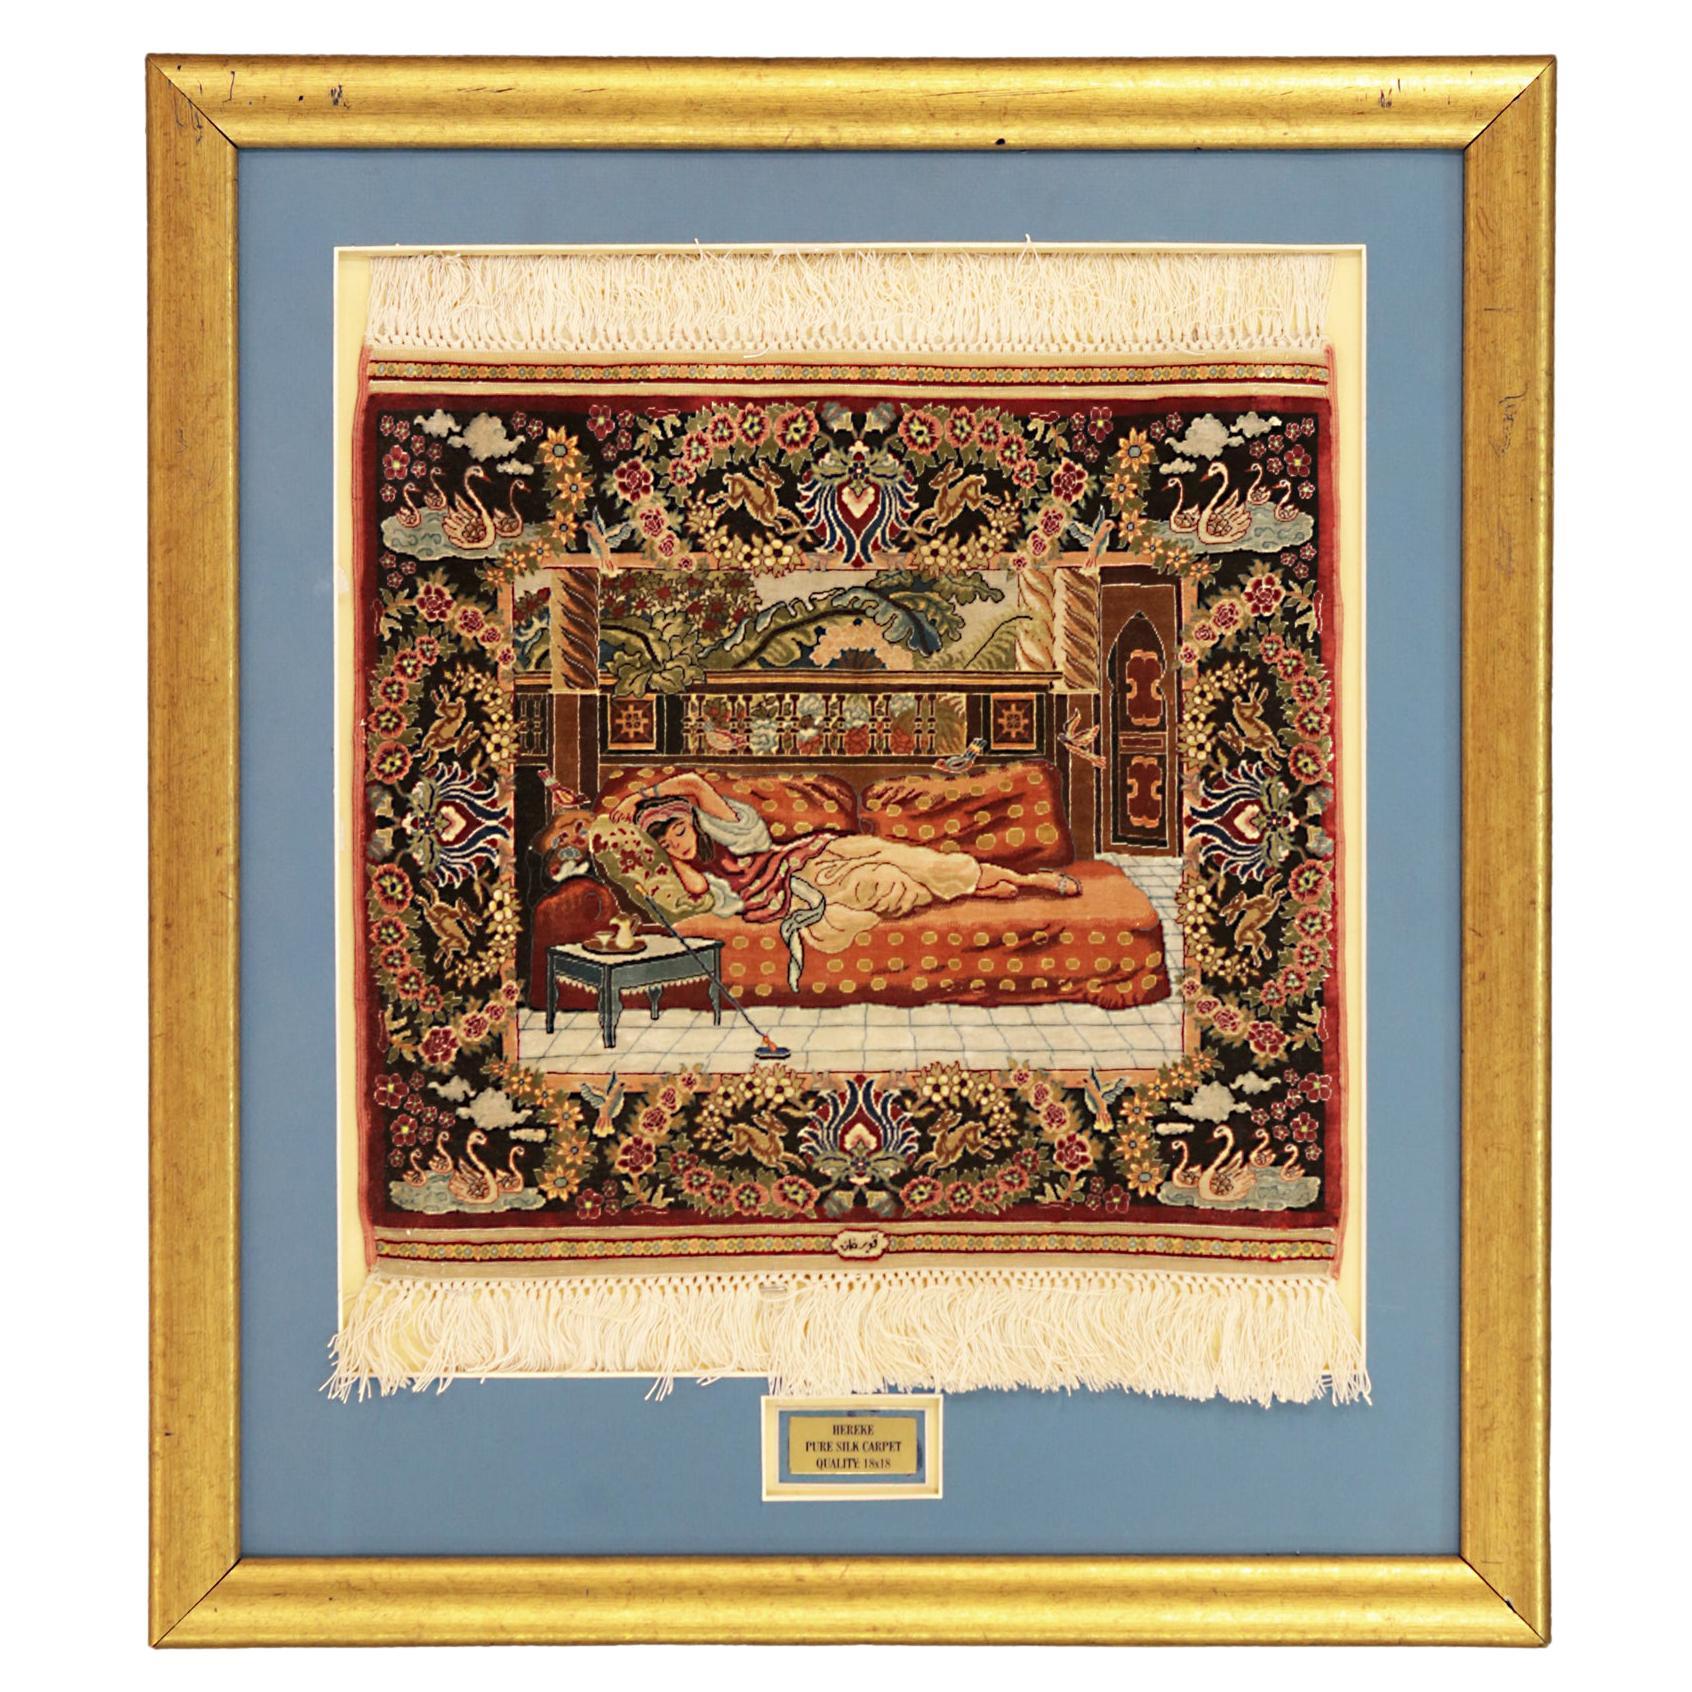 Turkish Hereke Lady Resting On a Chaise Lounge Couch Design Silk Rug, 1970-2000